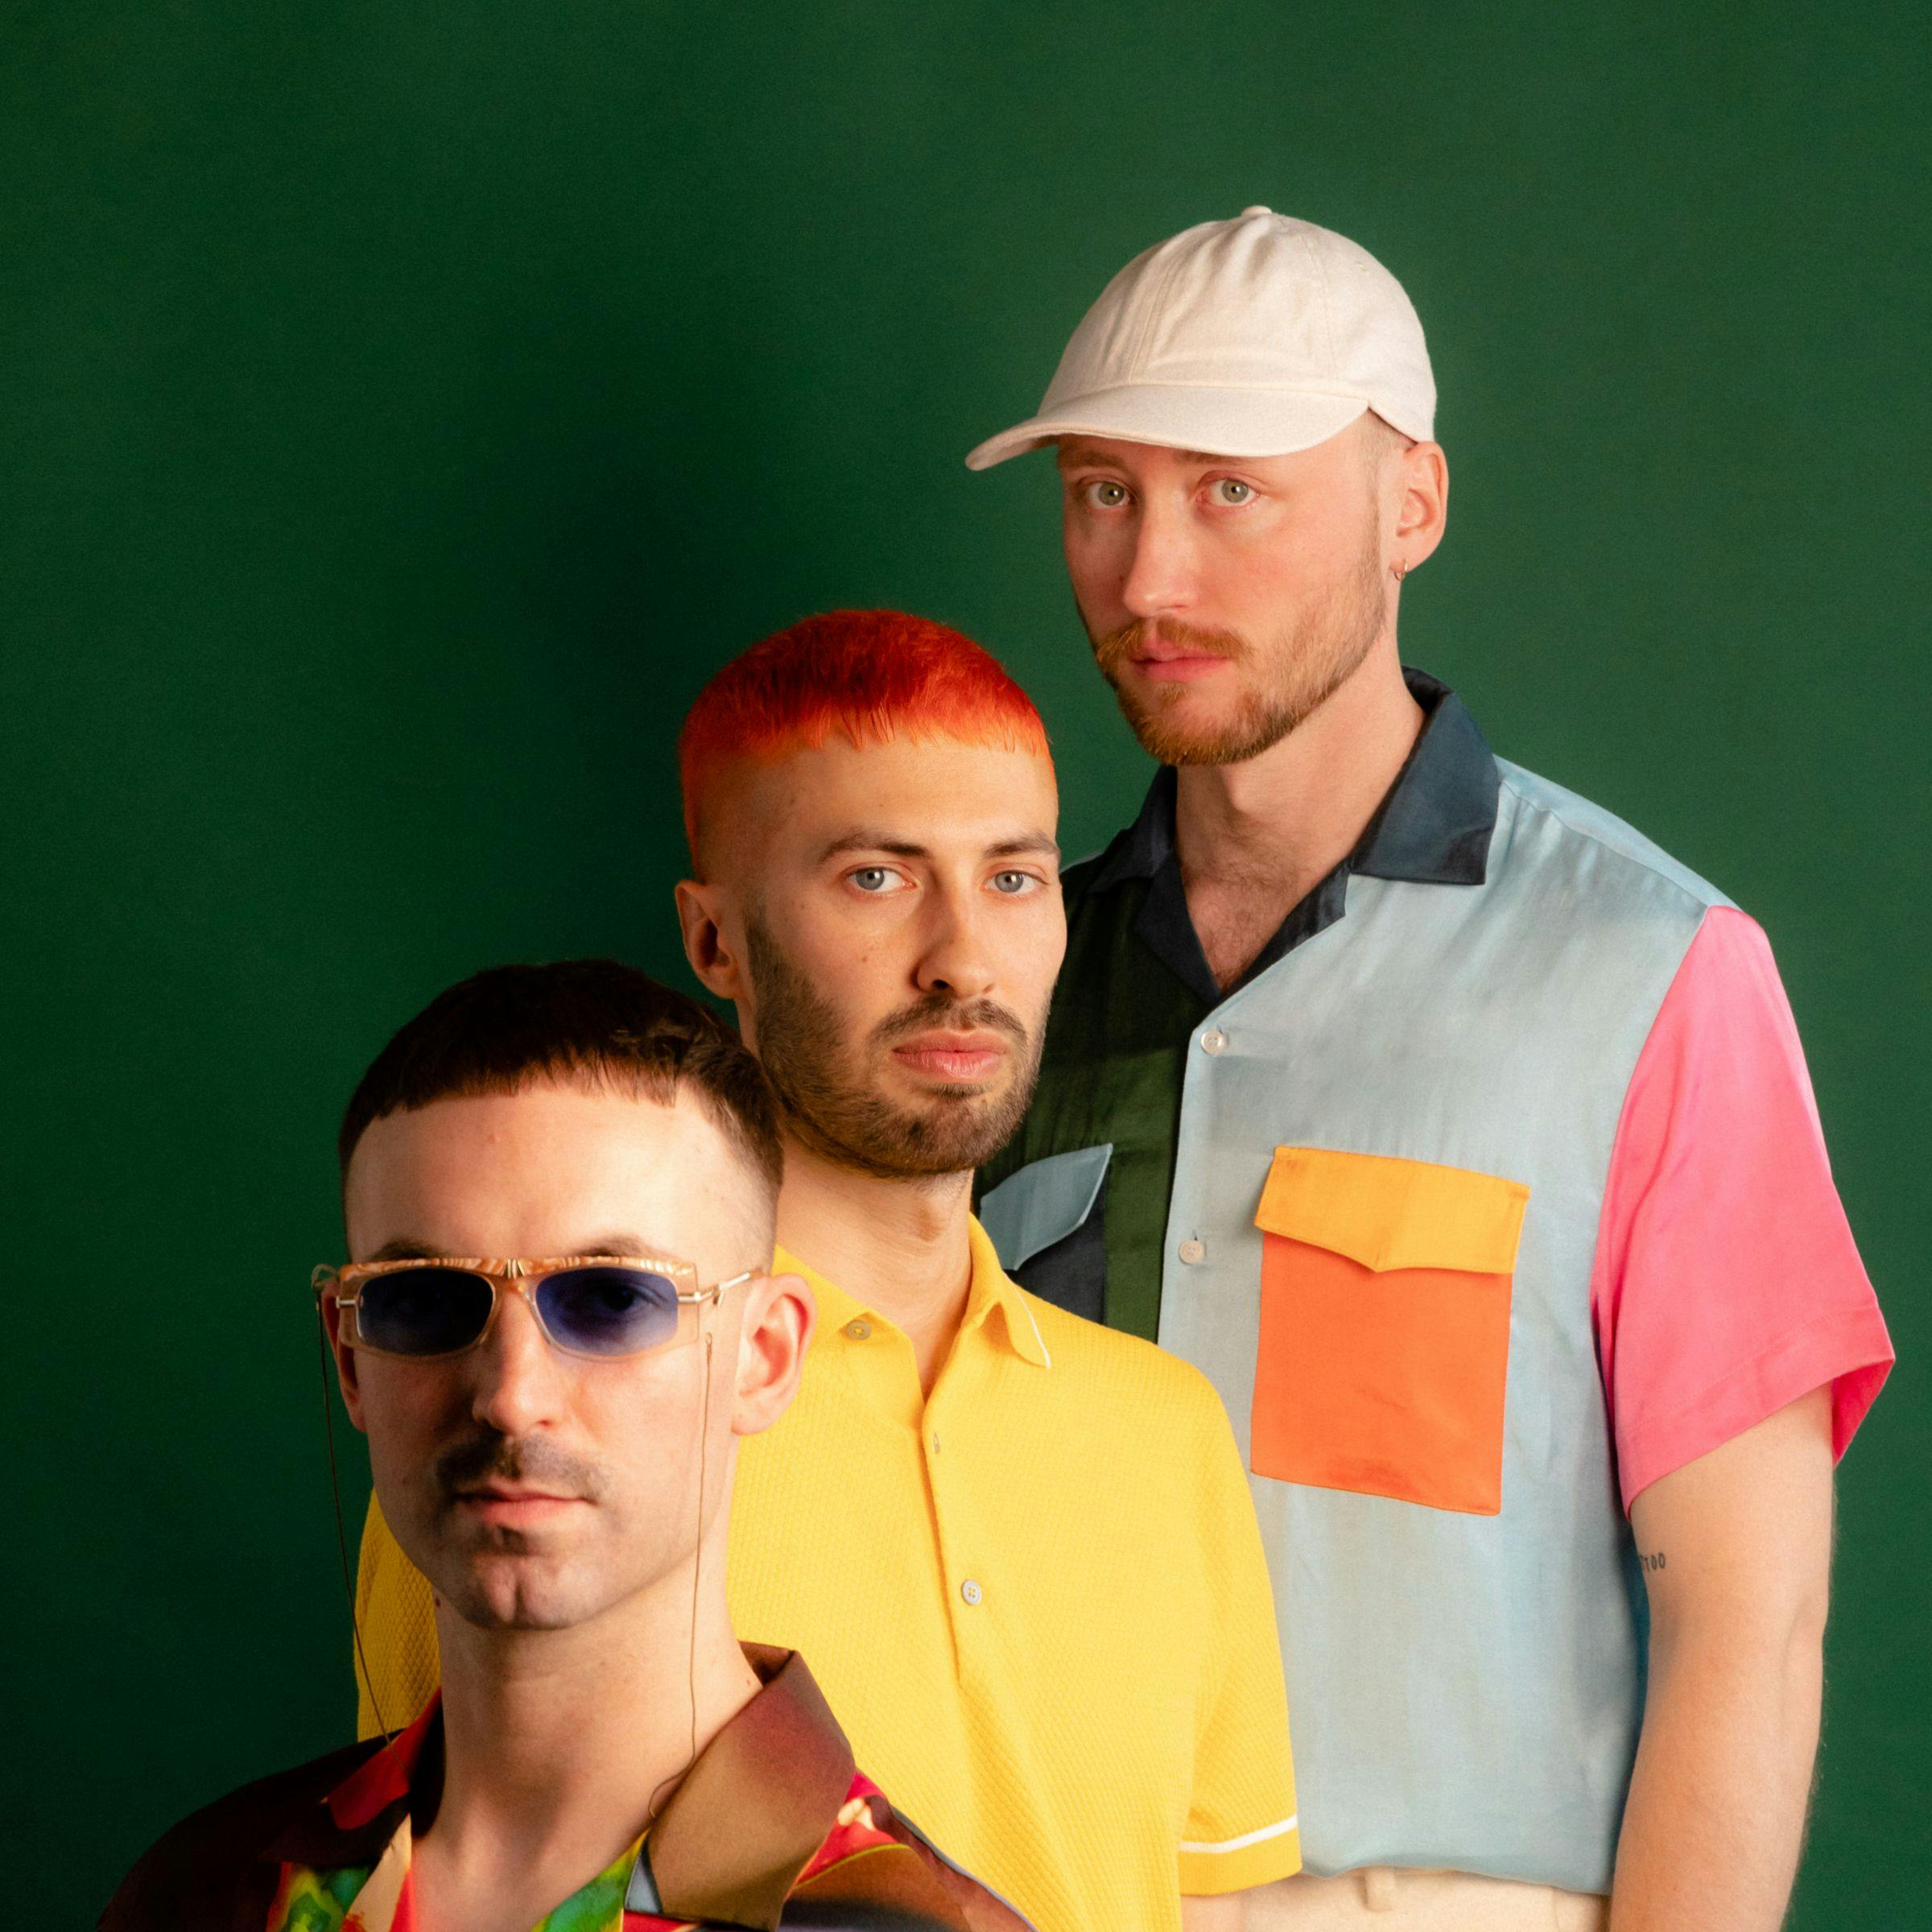 The three band members of Tropikel Ltd. are standing in colorful clothing against a dark green background, looking directly into the camera.